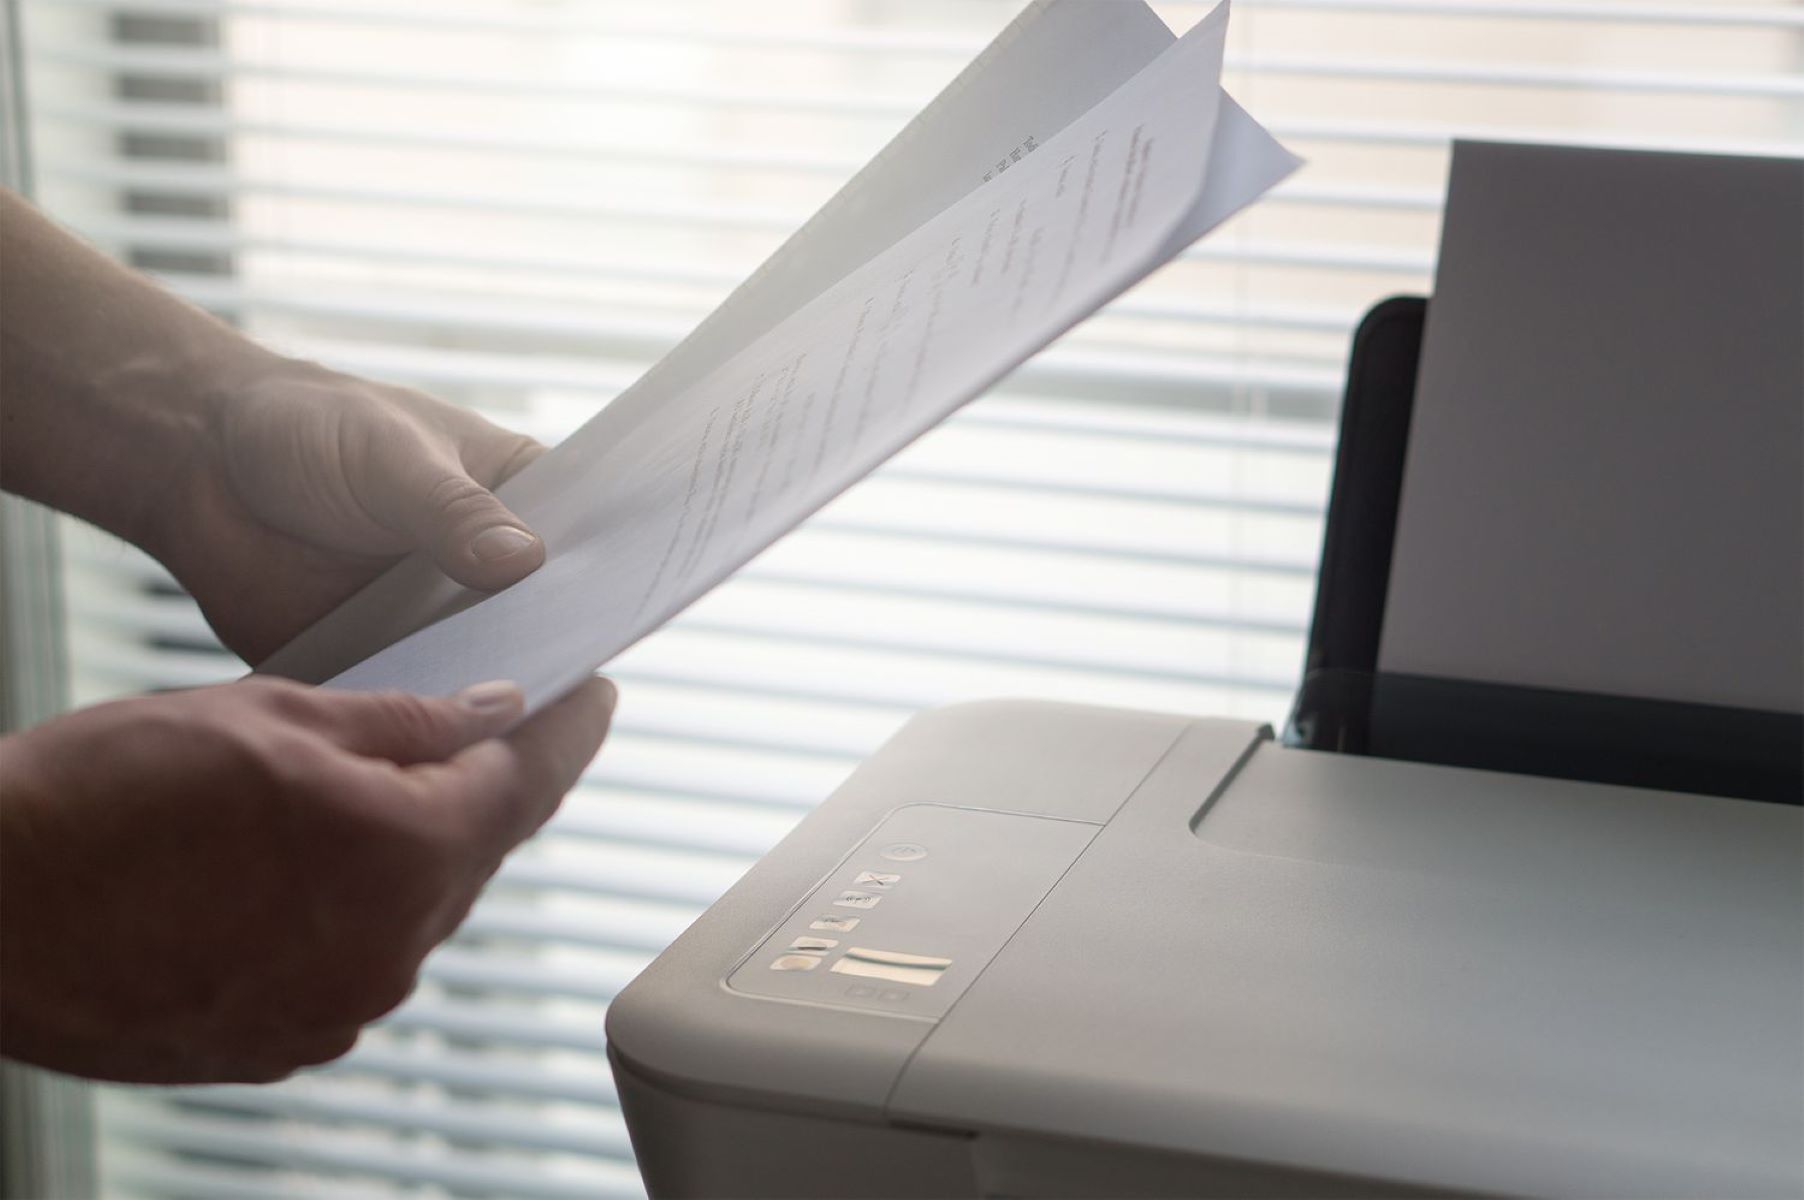 How To Use Printer Without Wi-Fi